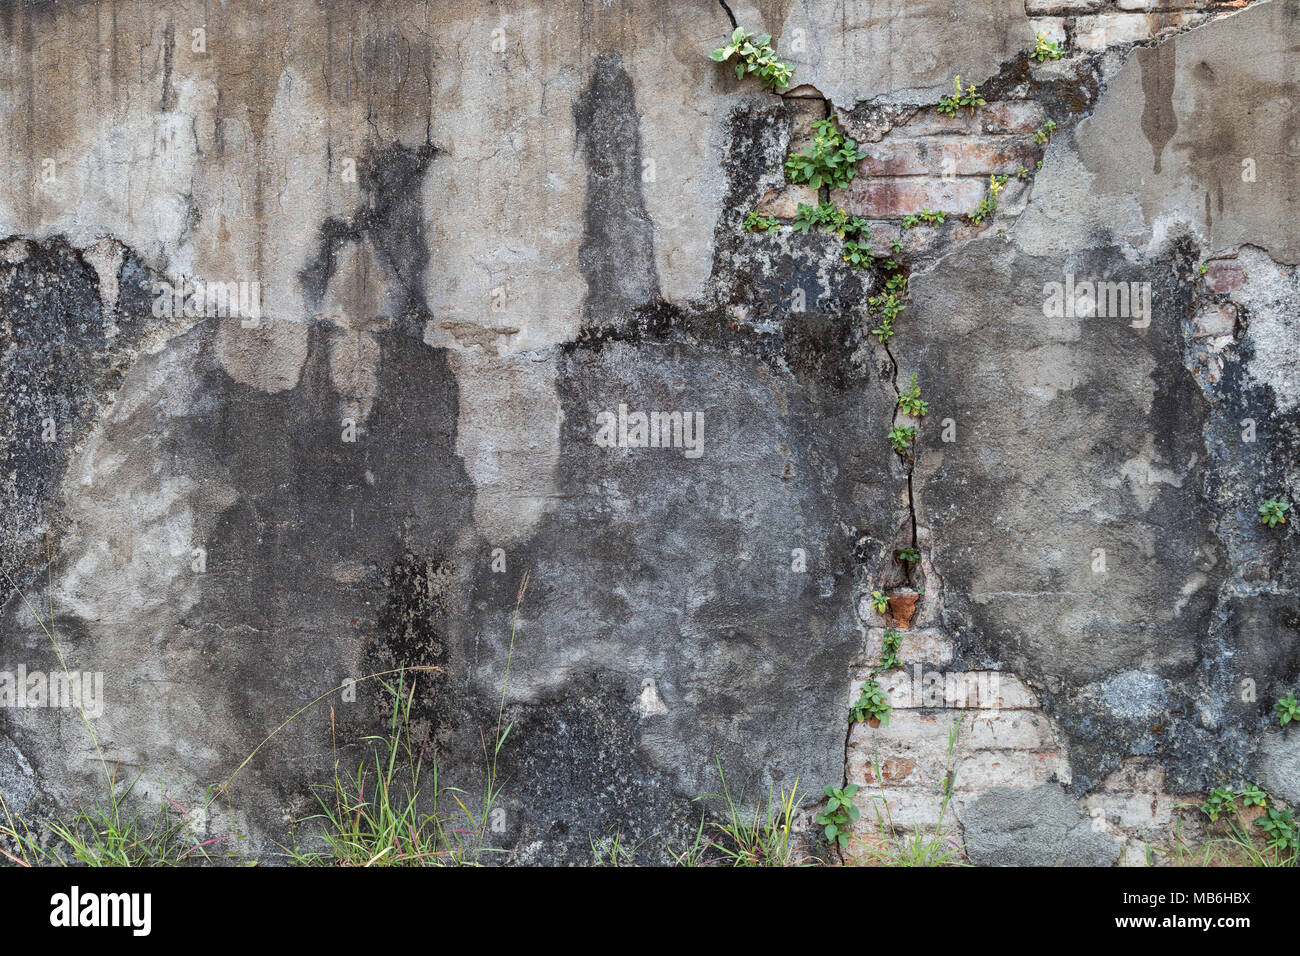 Full frame background of a weathered and damaged concrete wall and some plants. Plaster partly peeled off revealing bricks. Stock Photo